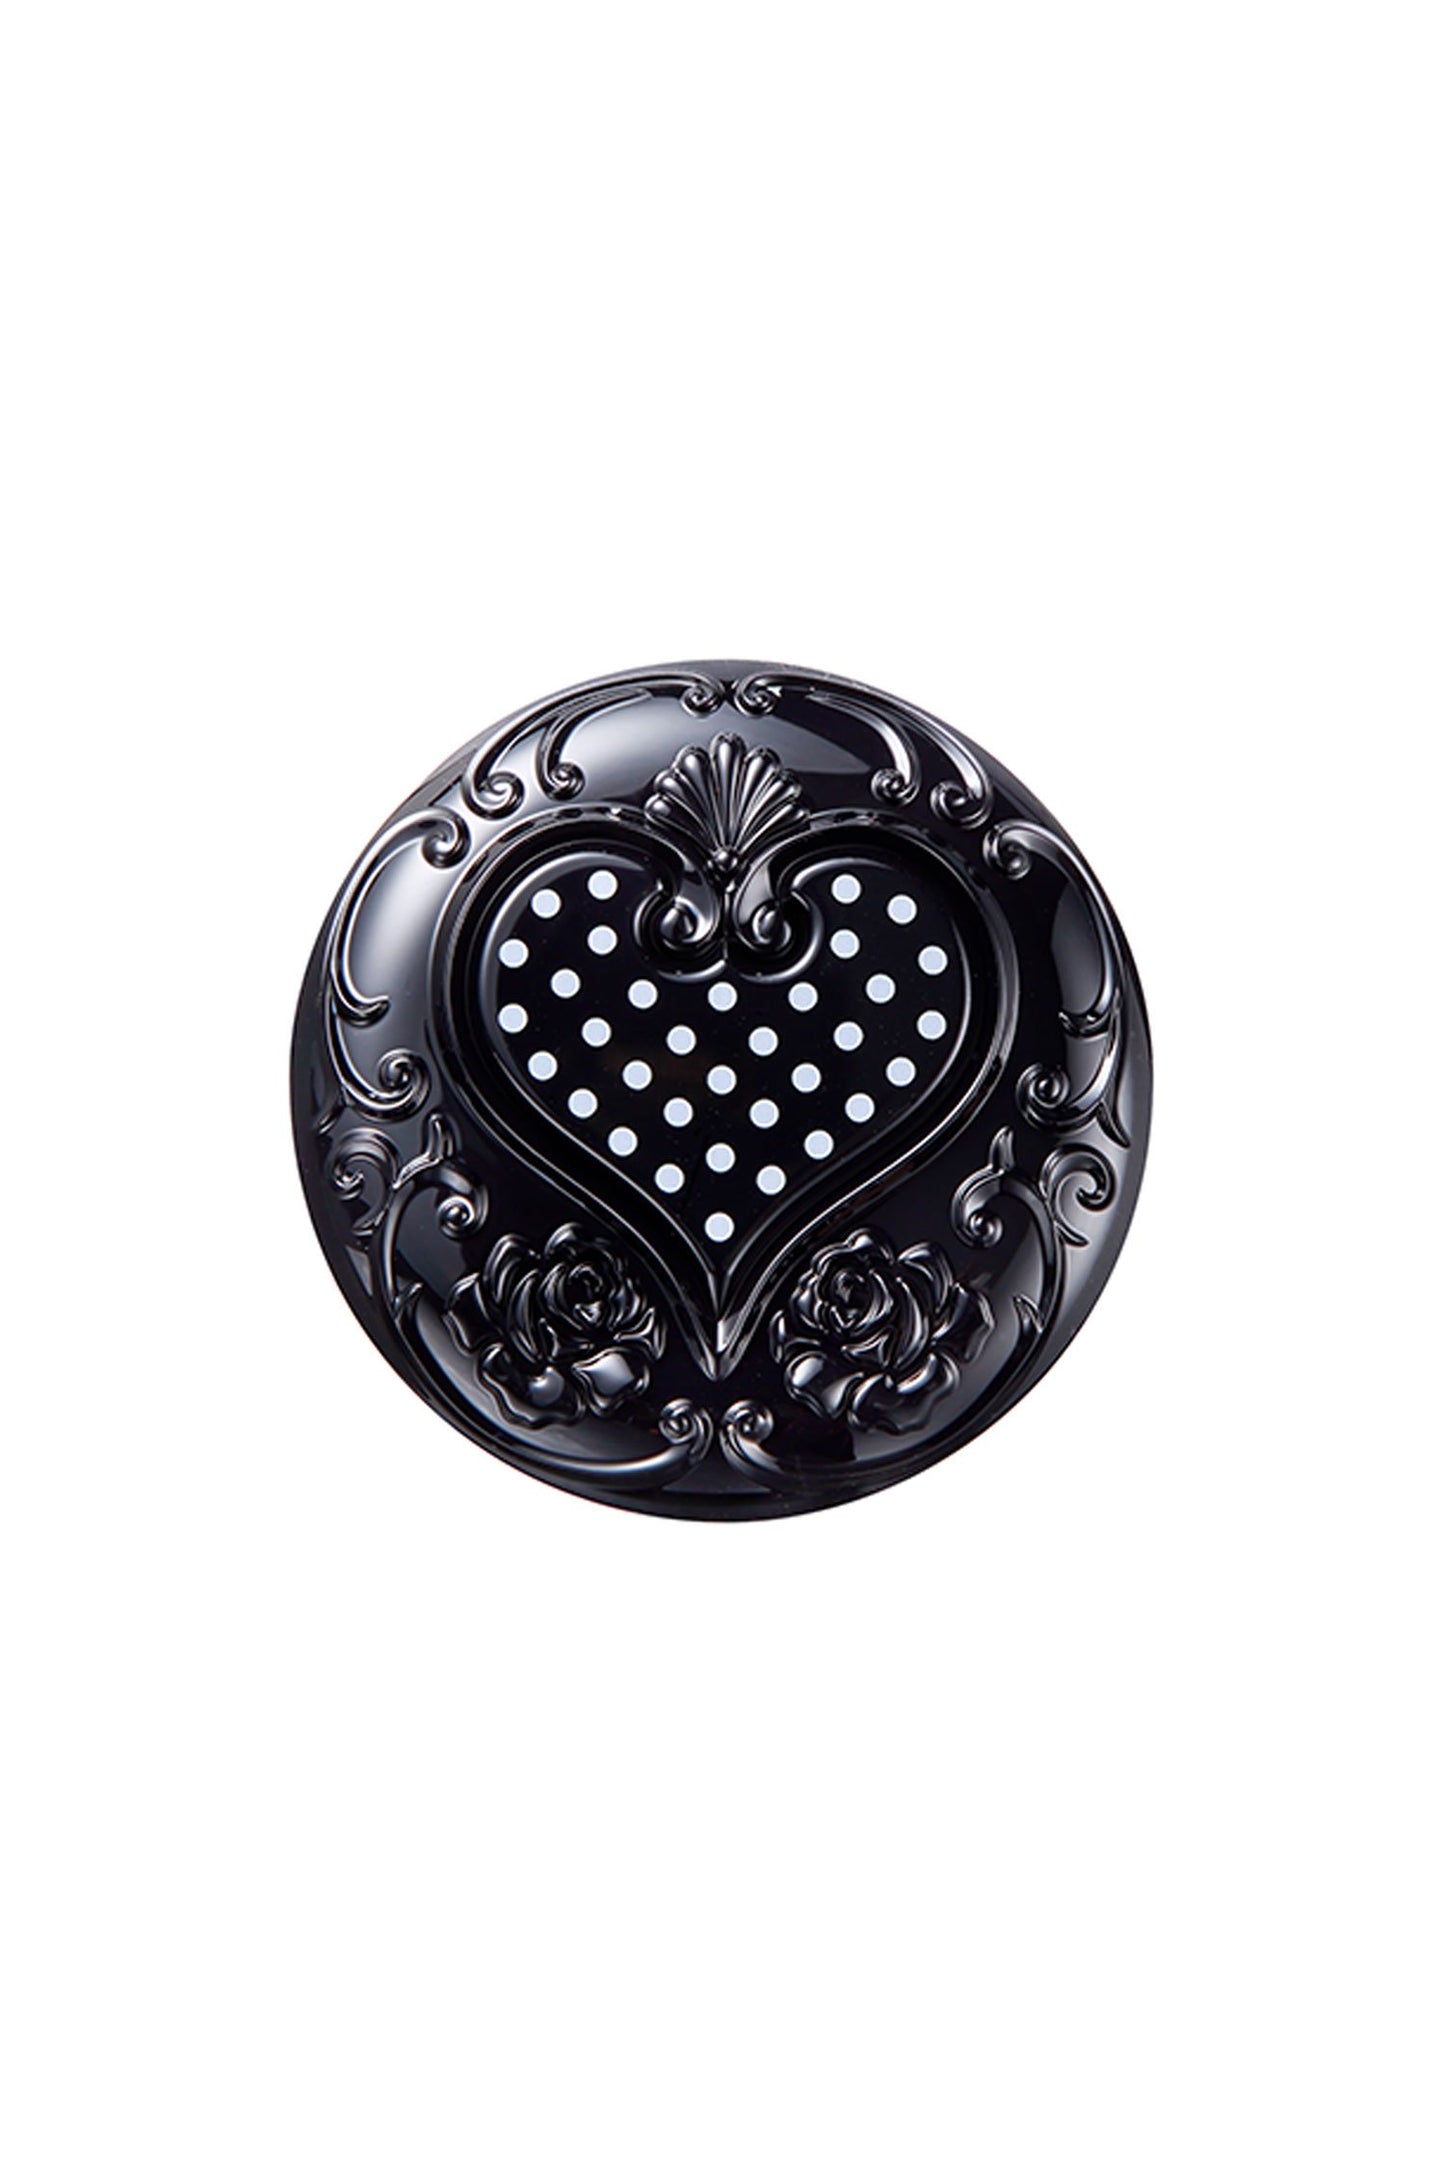 Black round top lid of the container, engraved roses design, and a heart with white dots inside. 